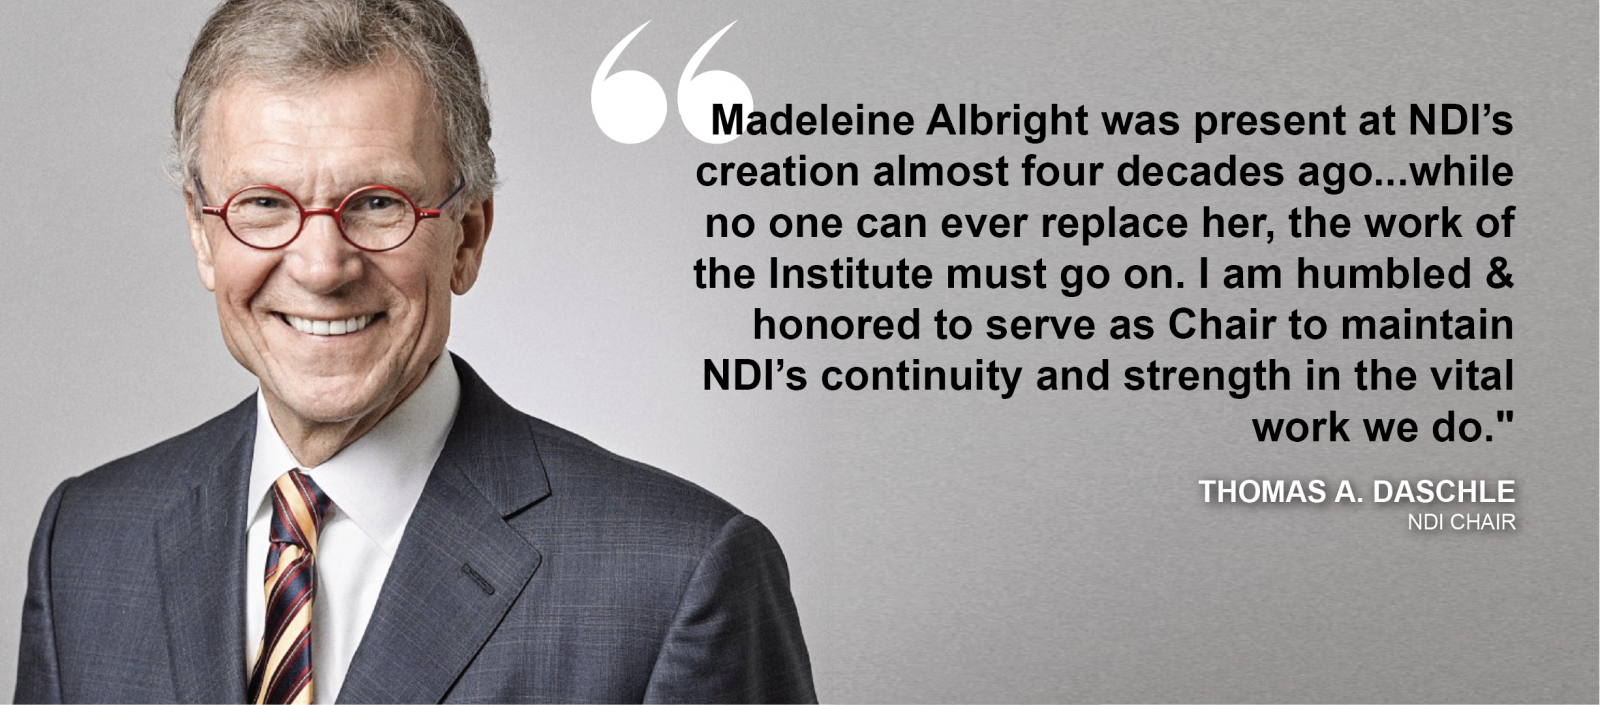 NDI's Board has selected former Senator Thomas A. Daschle as its new Chair